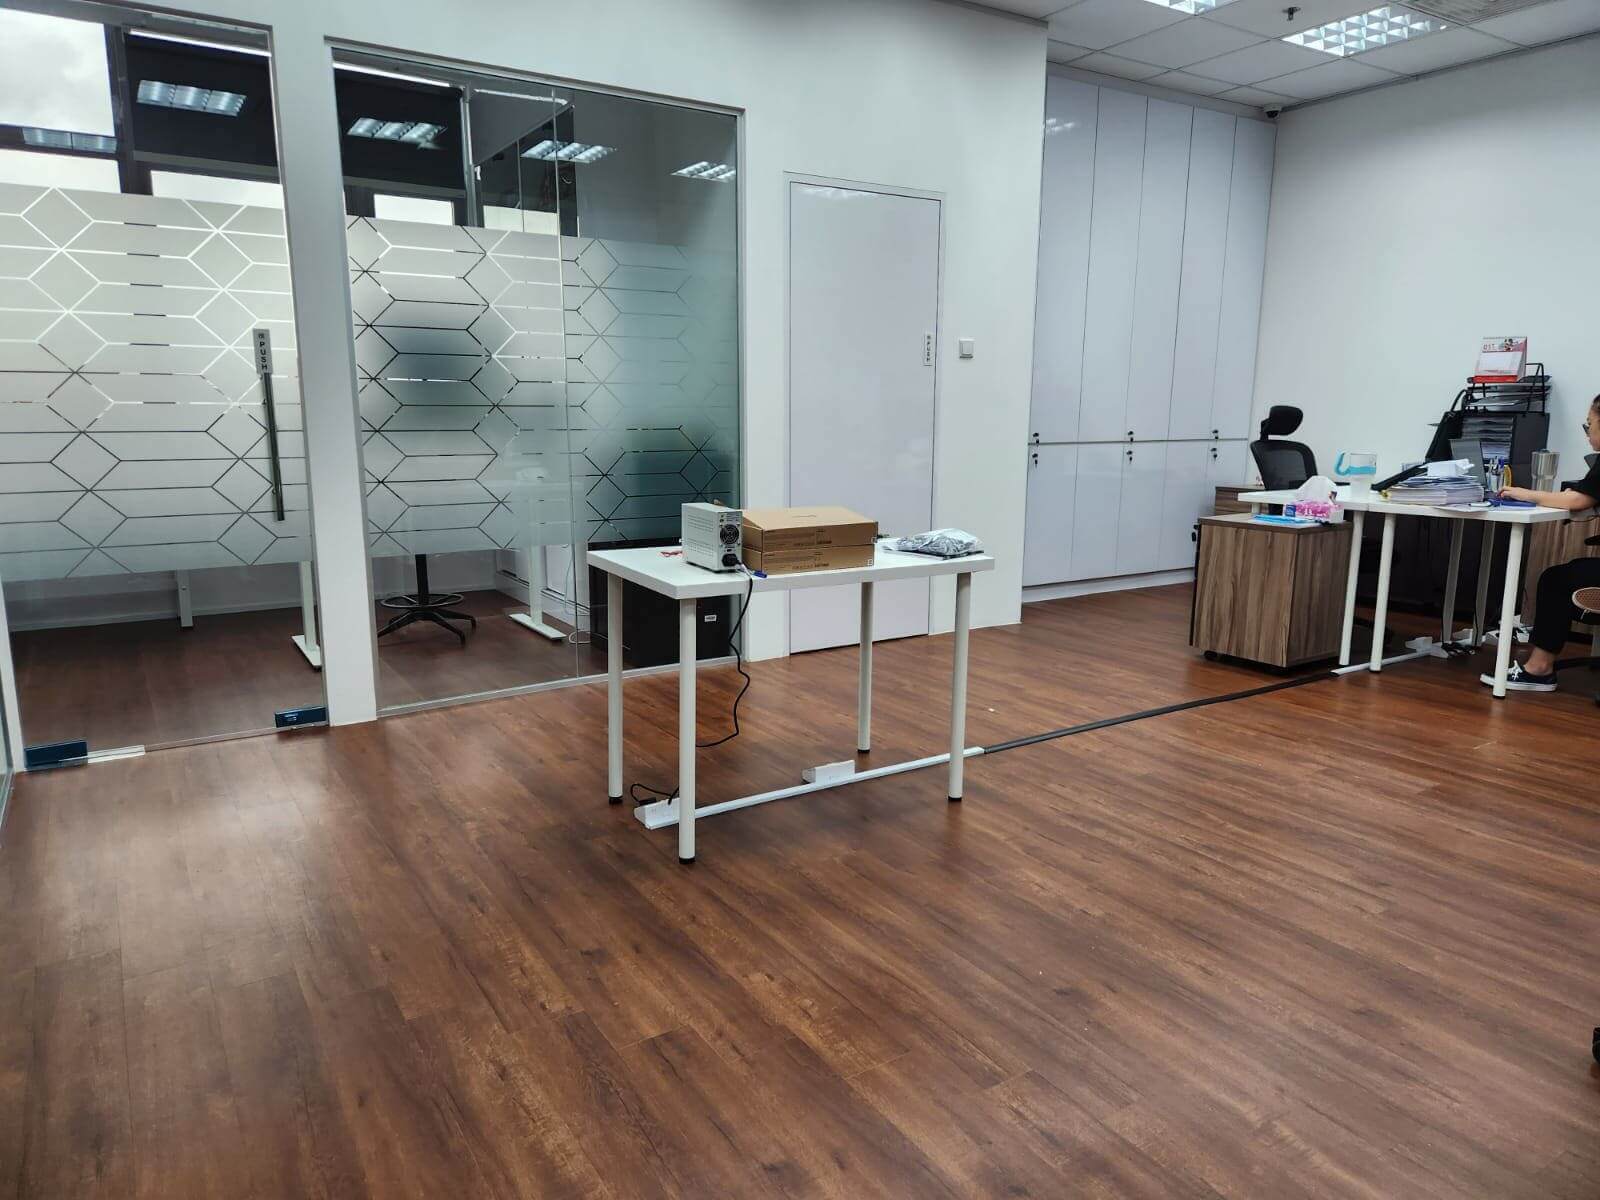 B1 Factory Space For Sales (High Rental)